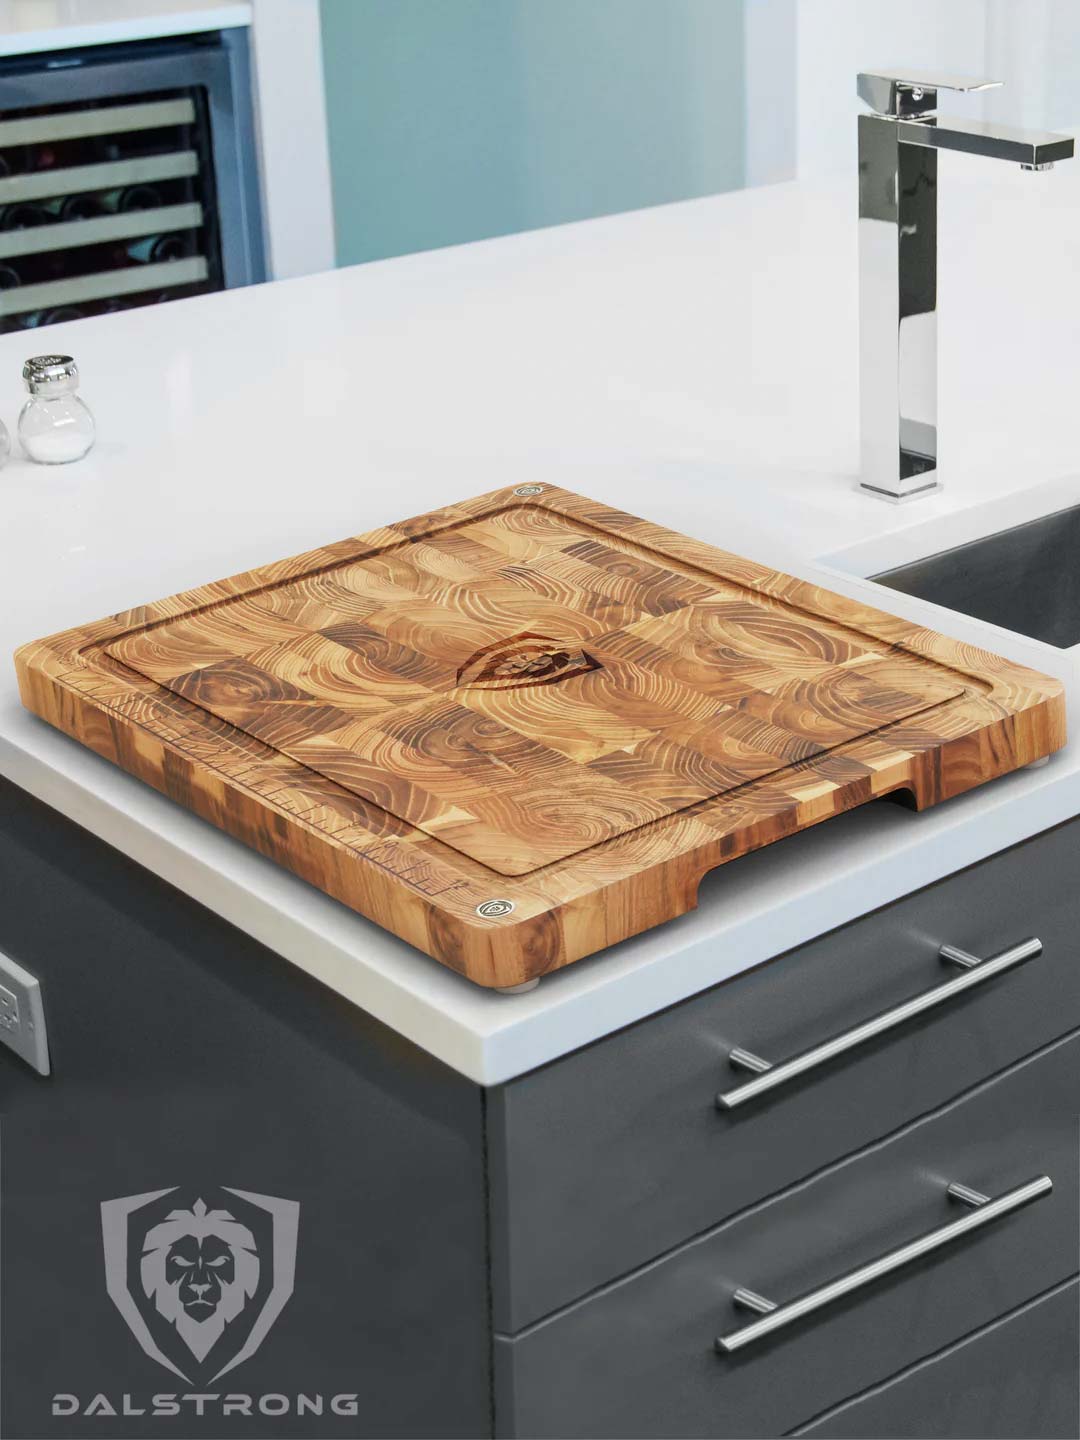 Dalstrong teak cutting board medium size on top of a kitchen table.